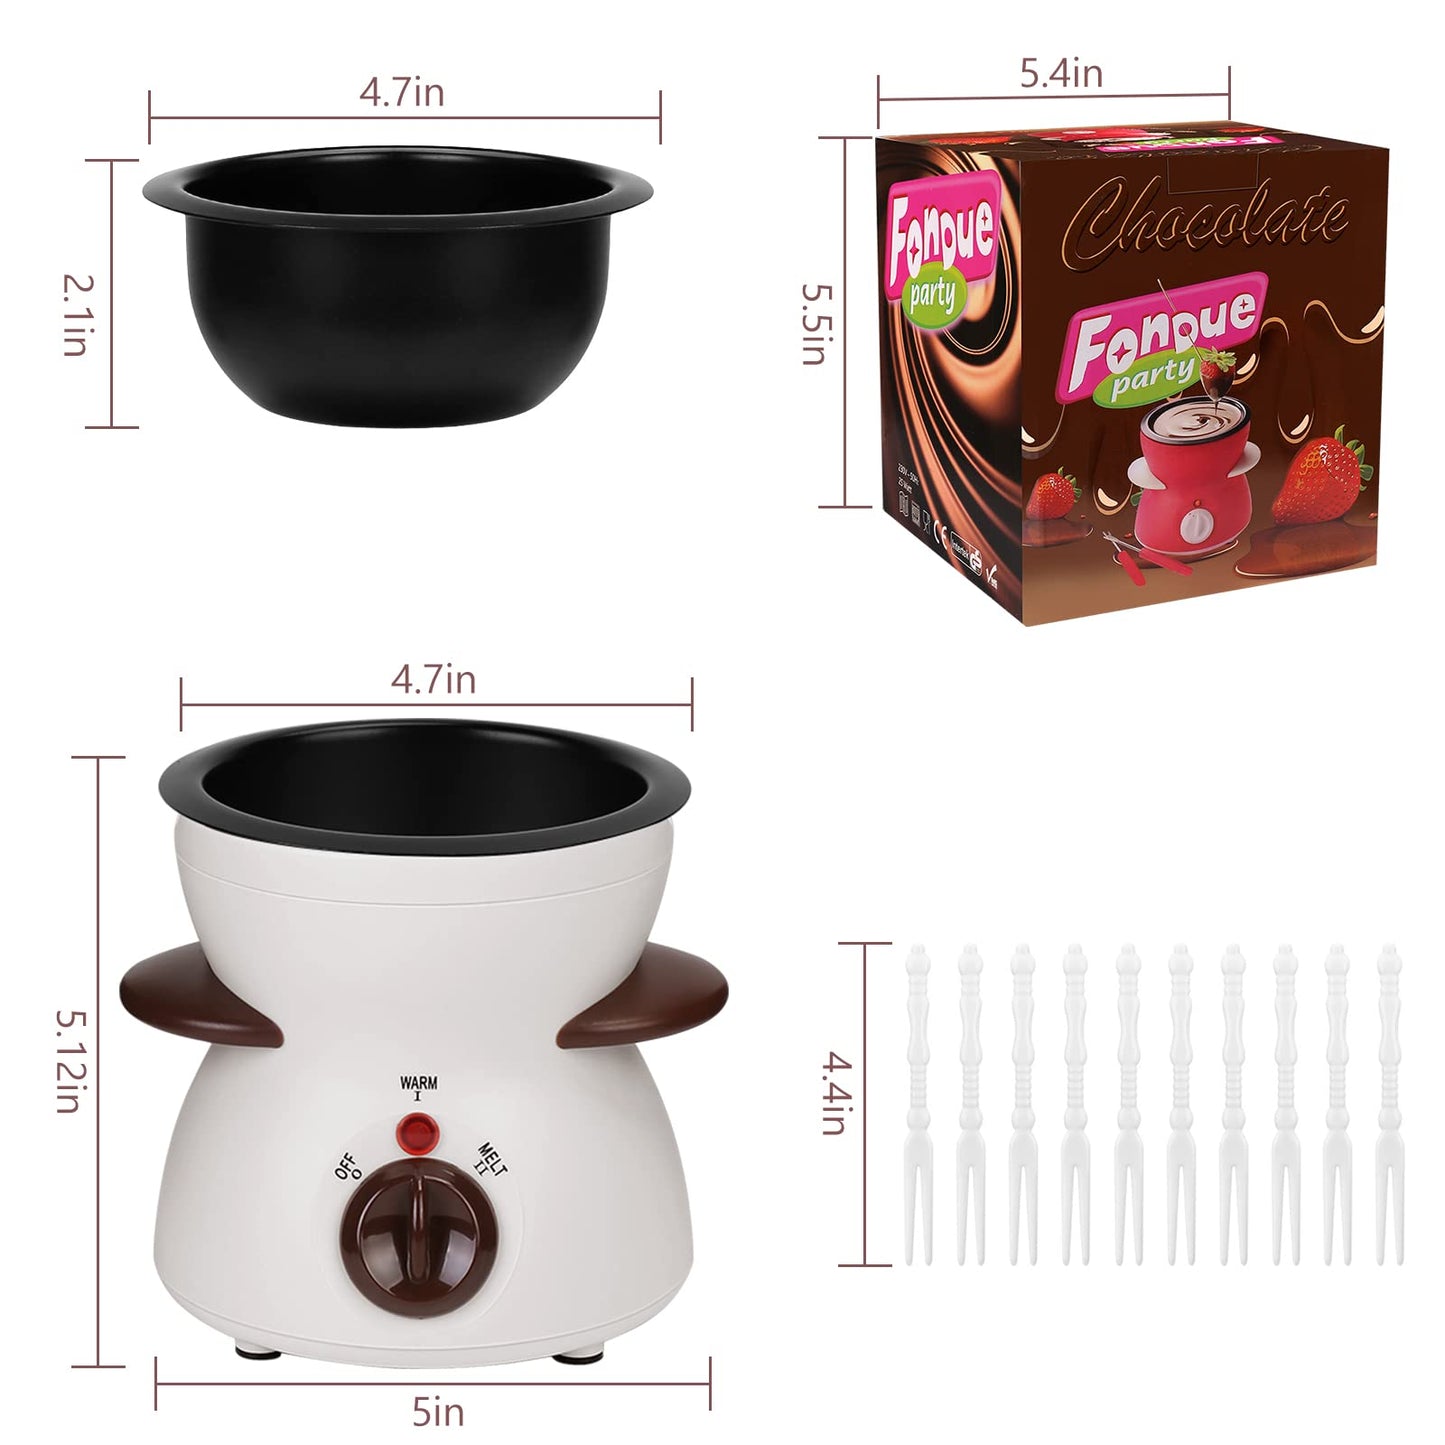 OFFKITSLY Fondue Pot Set, Mini Electric Fondue Pot Set for Melting Chocolate Cheese, Chocolate Meting Pot fondue maker Machine with Dipping Forks For Holiday Birthday Party Gift-White